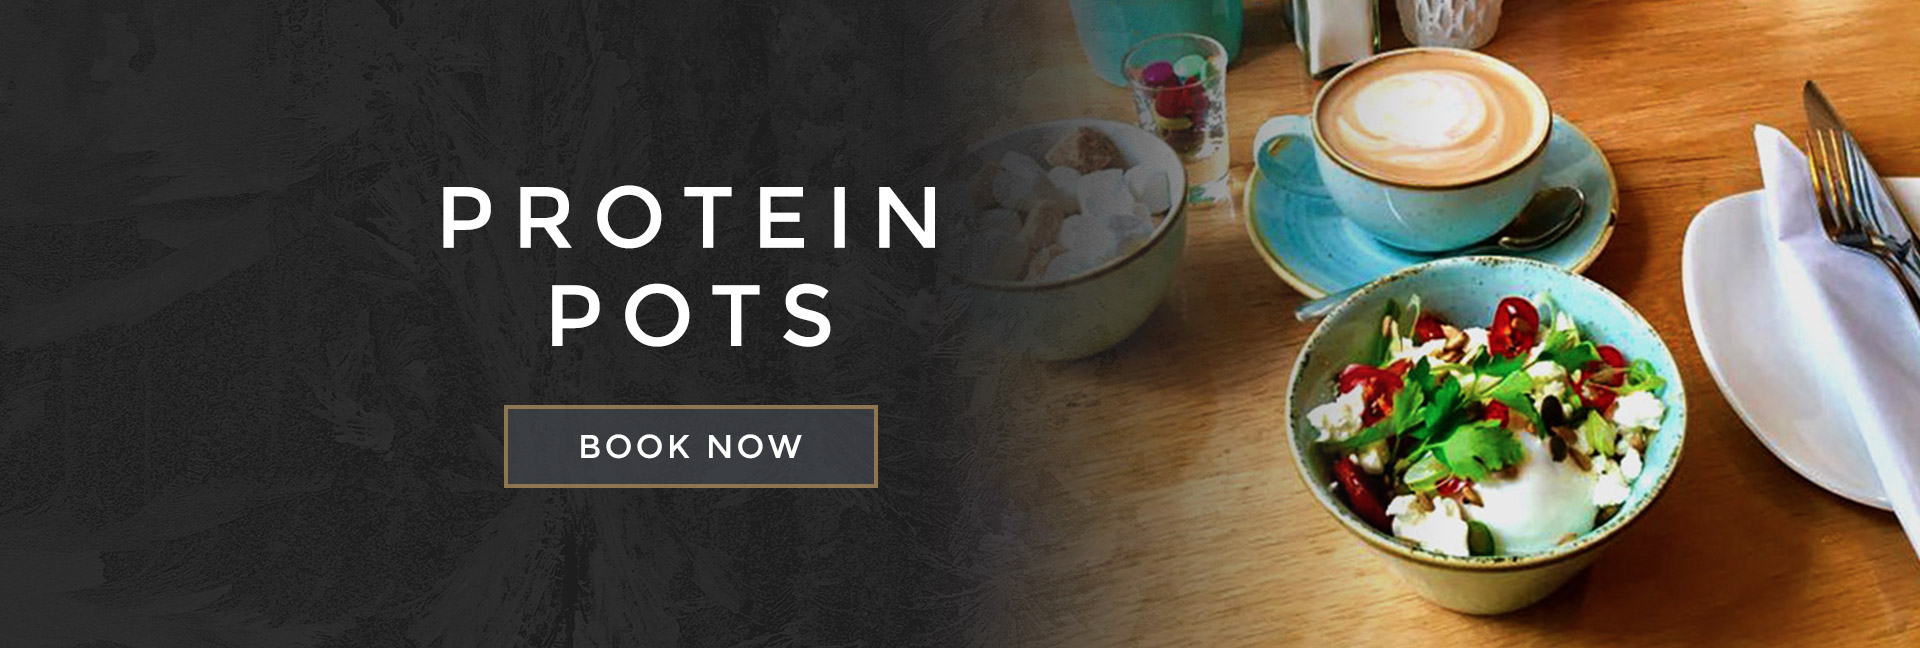 Protein pots at All Bar One Windsor - Book your table